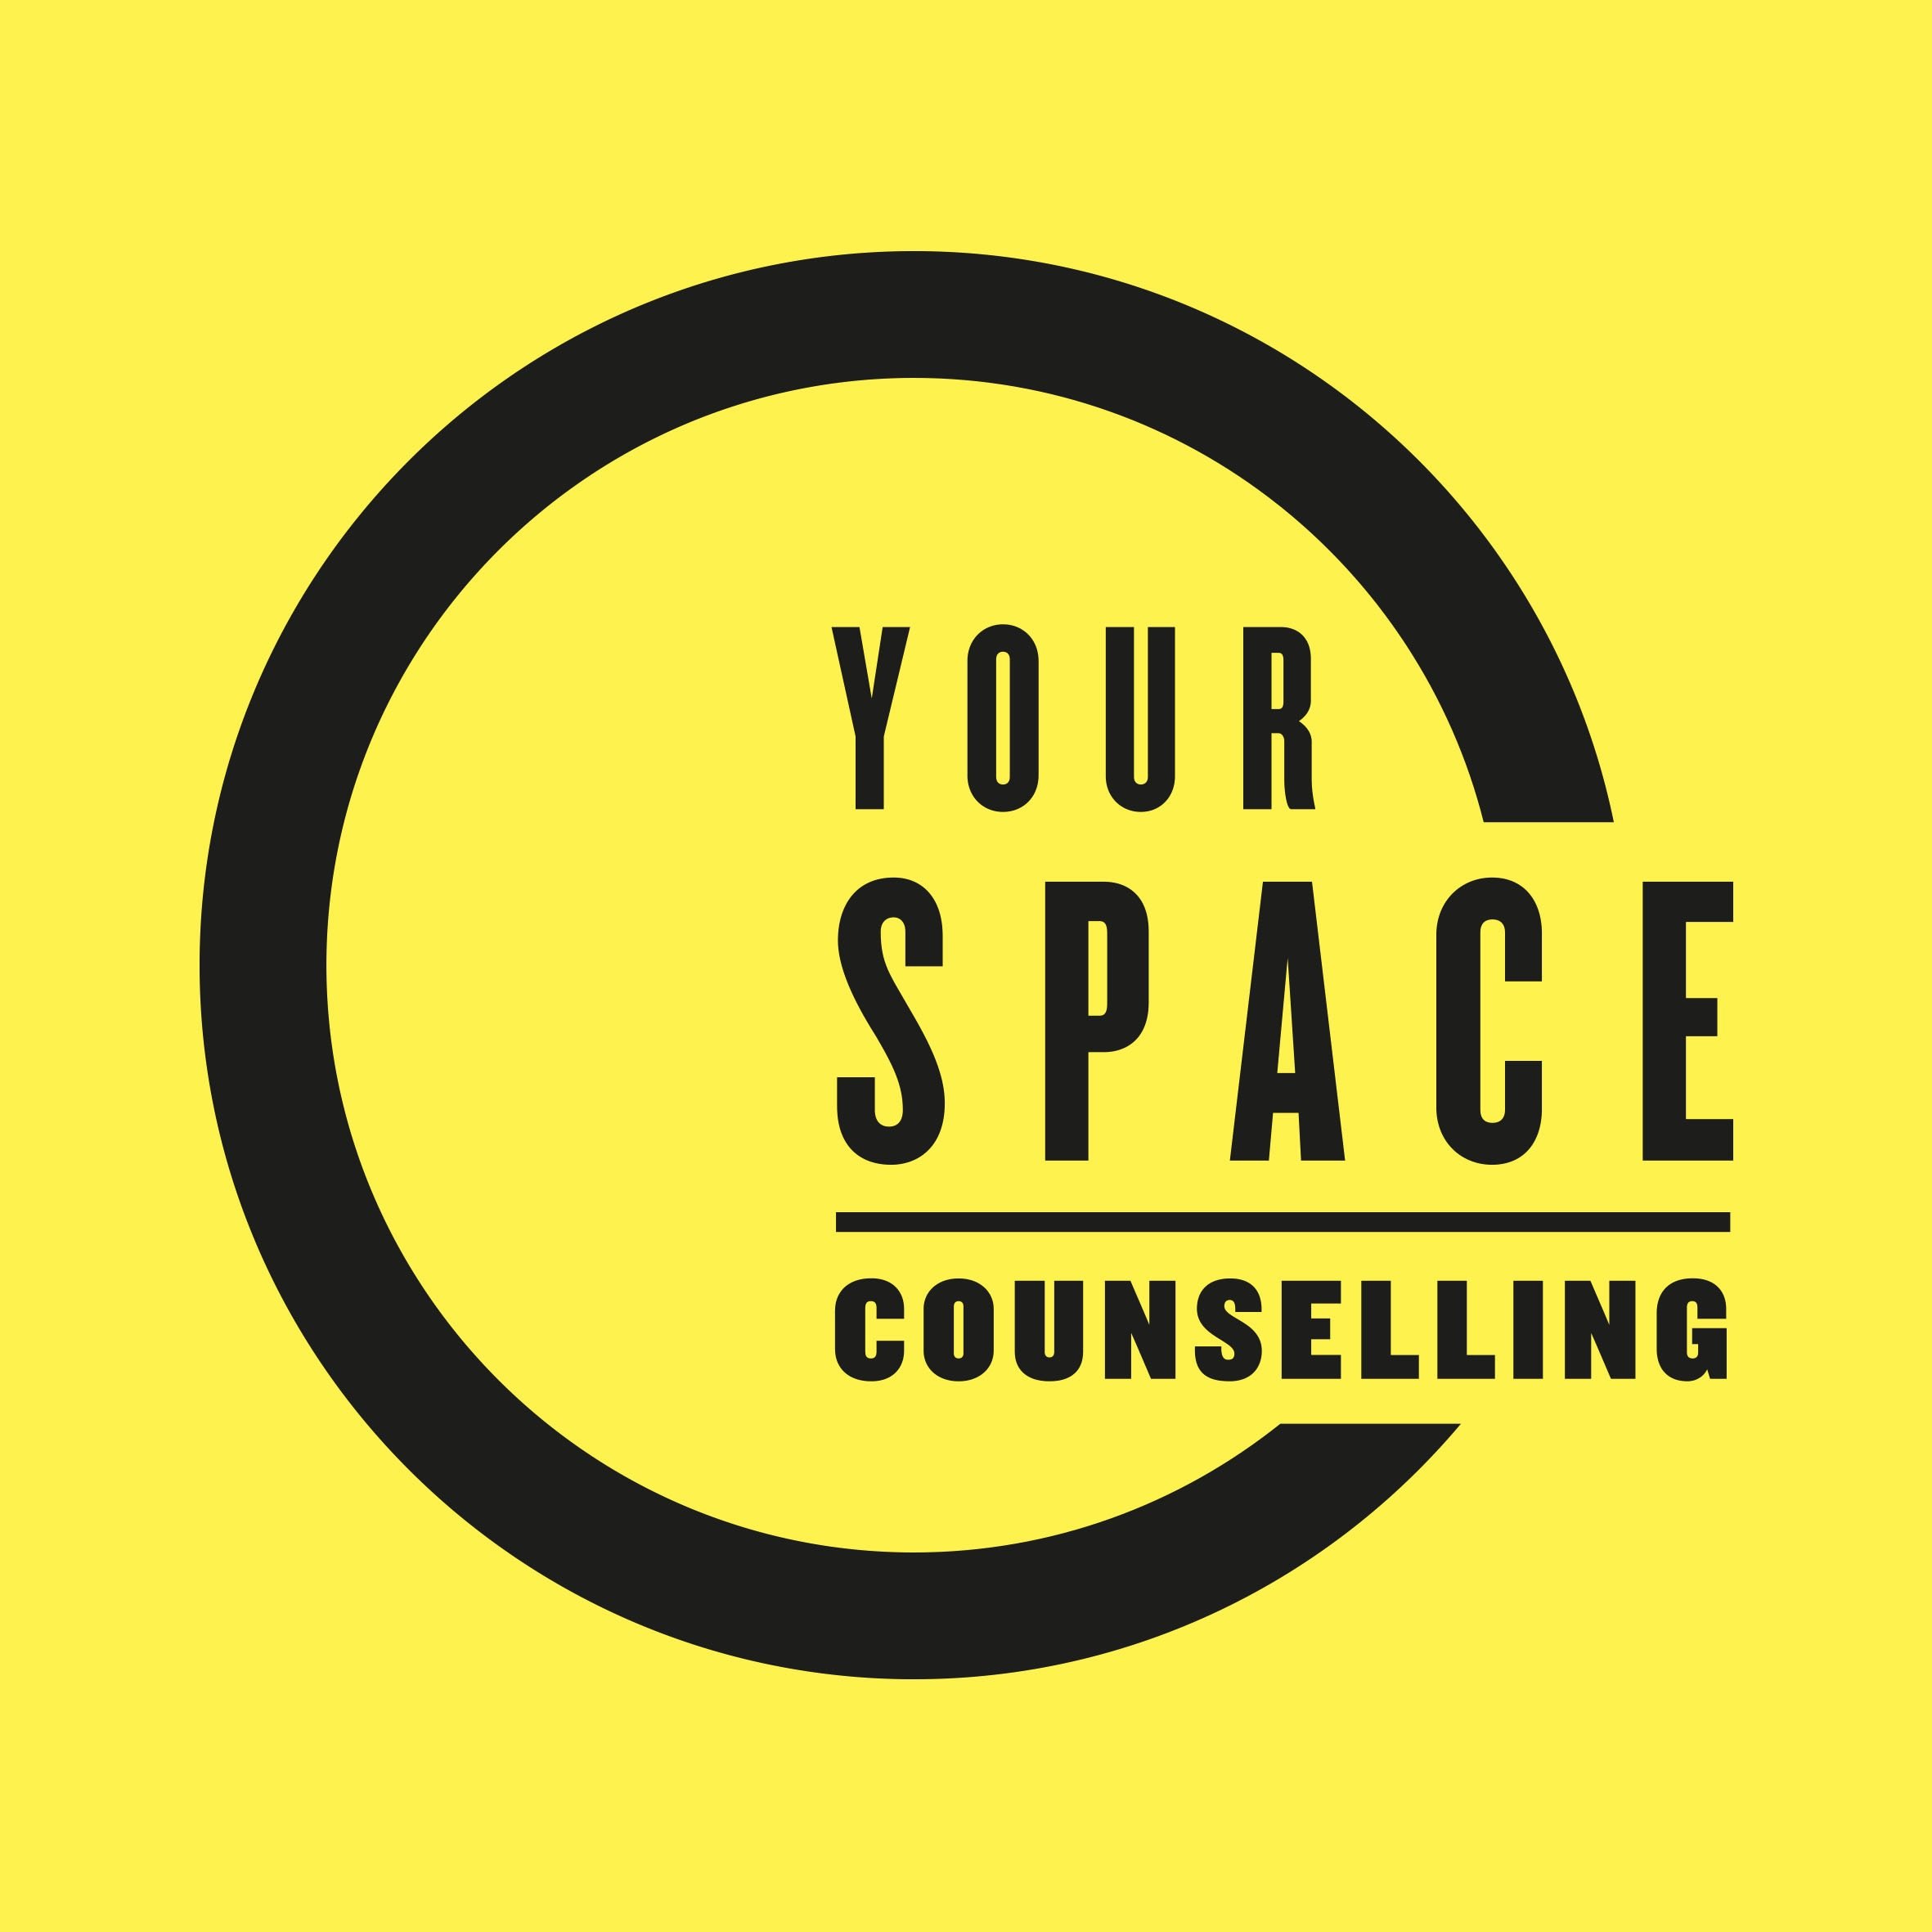 Your Space Counselling is an online counselling service. Please check out our website.